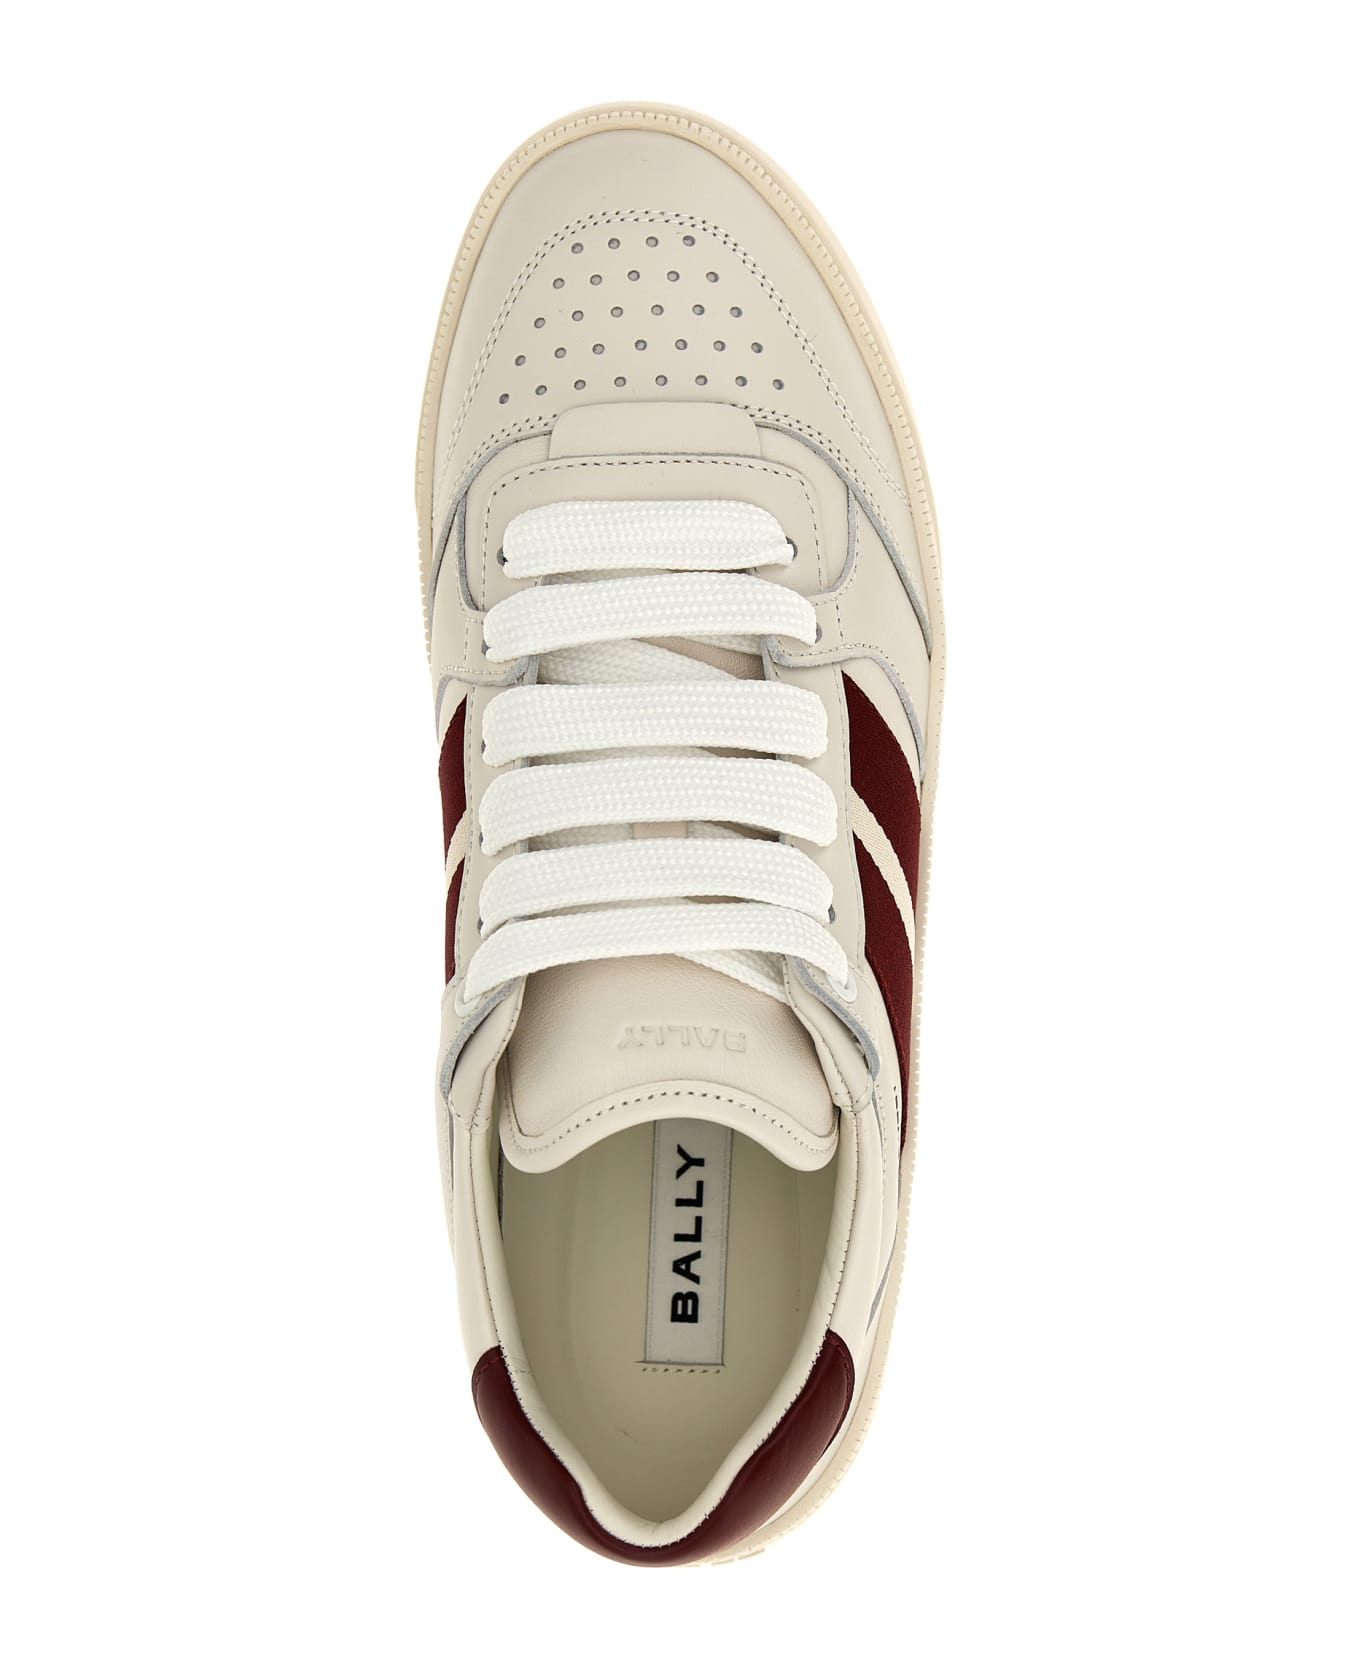 Bally 'rebby' Sneakers - Red